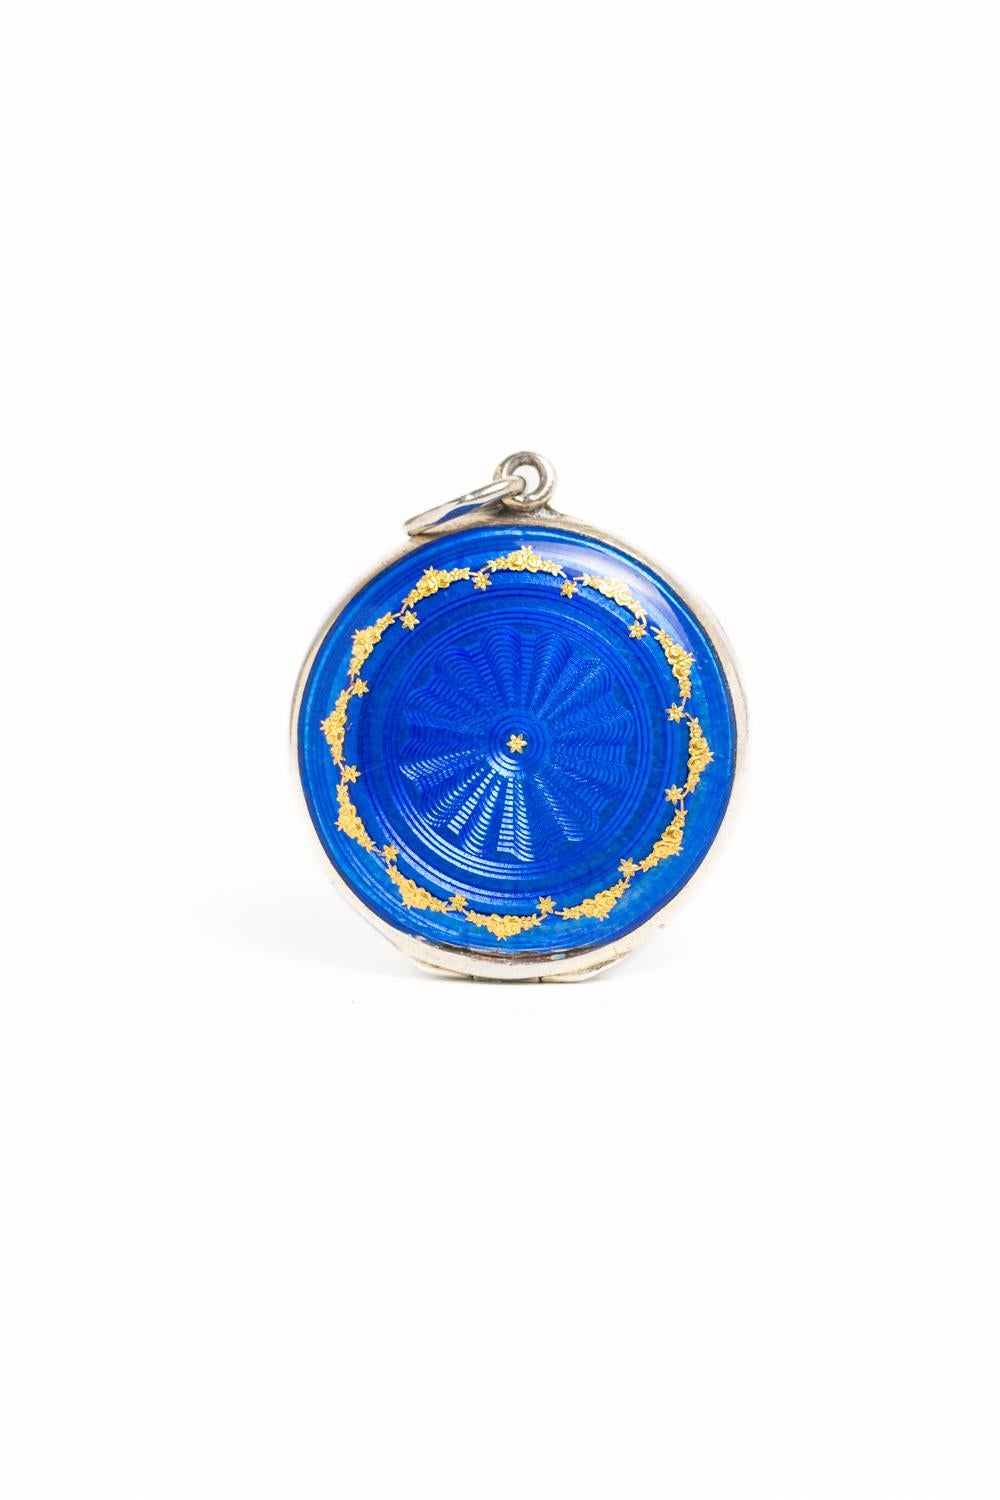 This charming Art Deco 1920's Cobalt Blue and gold guilloche enamel and silver gilt locket is most like made in Austria or Switzerland. The front cover of this beautiful piece is decorated in a striking cobalt blue guilloche enamel with a sunburst